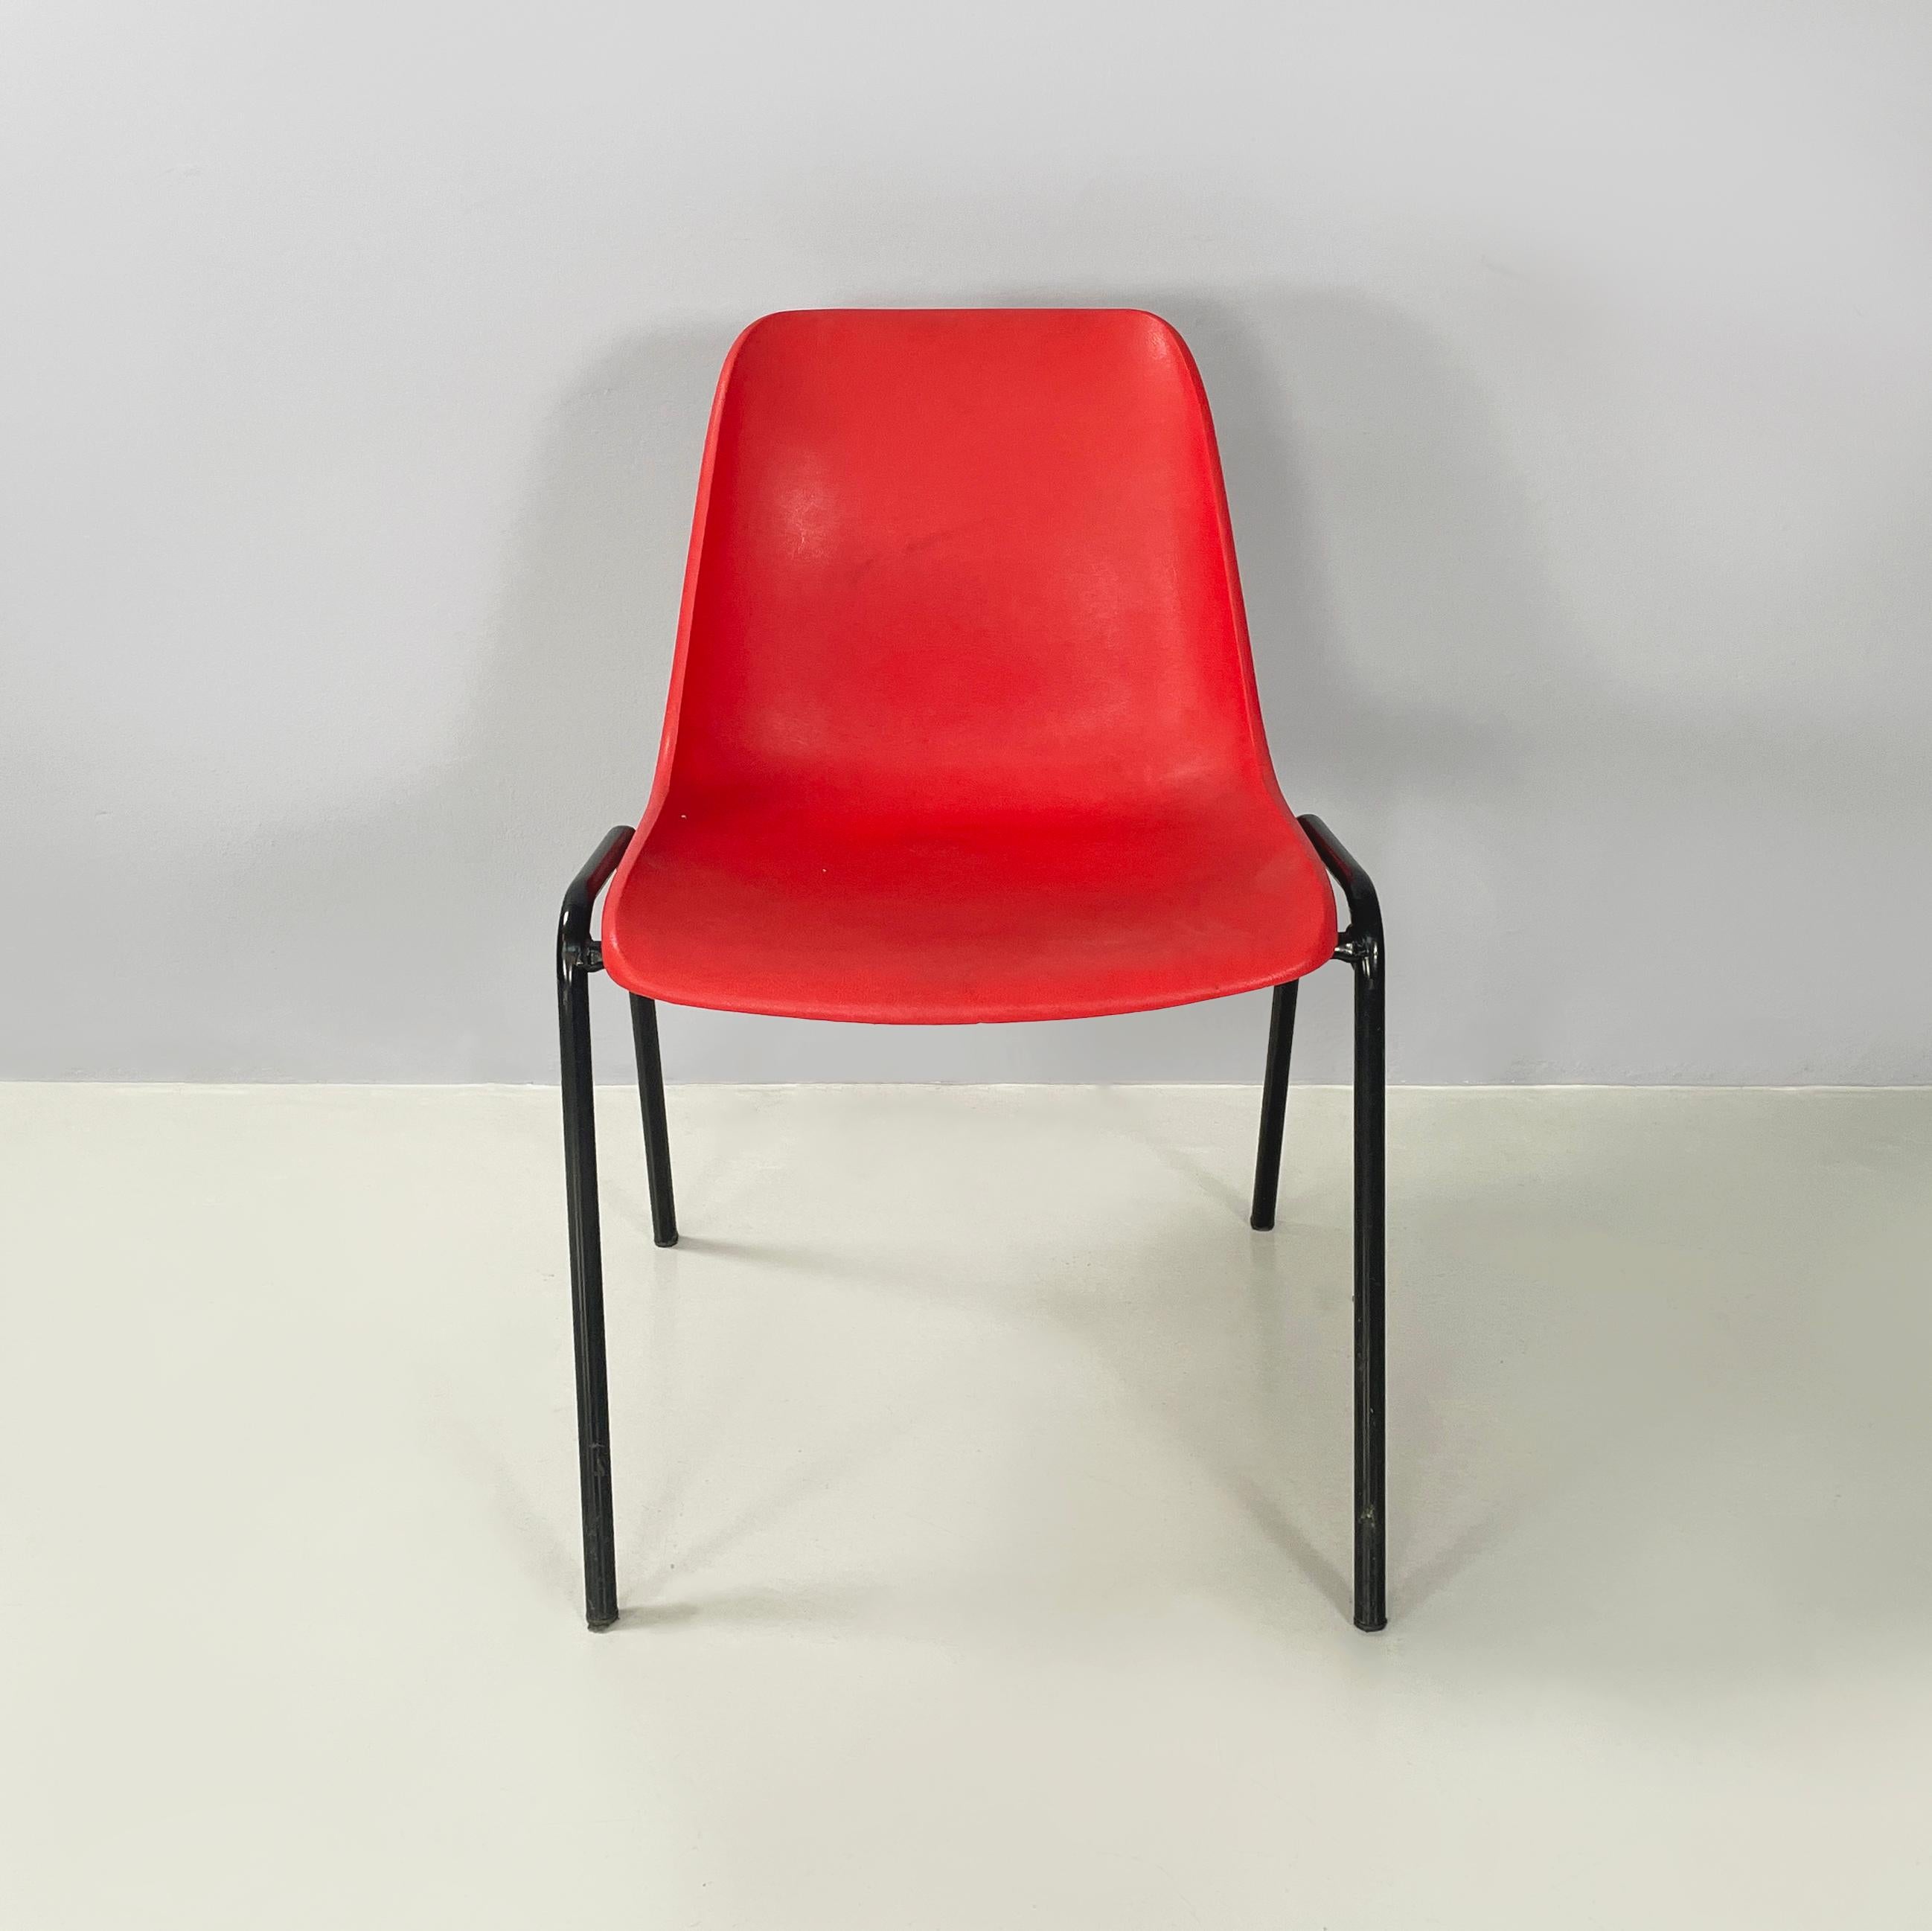 Italian modern Stackable chairs in red plastic and black metal, 2000
Set of 5 chairs with curved monocoque in red plastic. The legs are made of black painted metal rod. Stackable.
2000. Below the seat there are some logos.
Vintage conditions. The